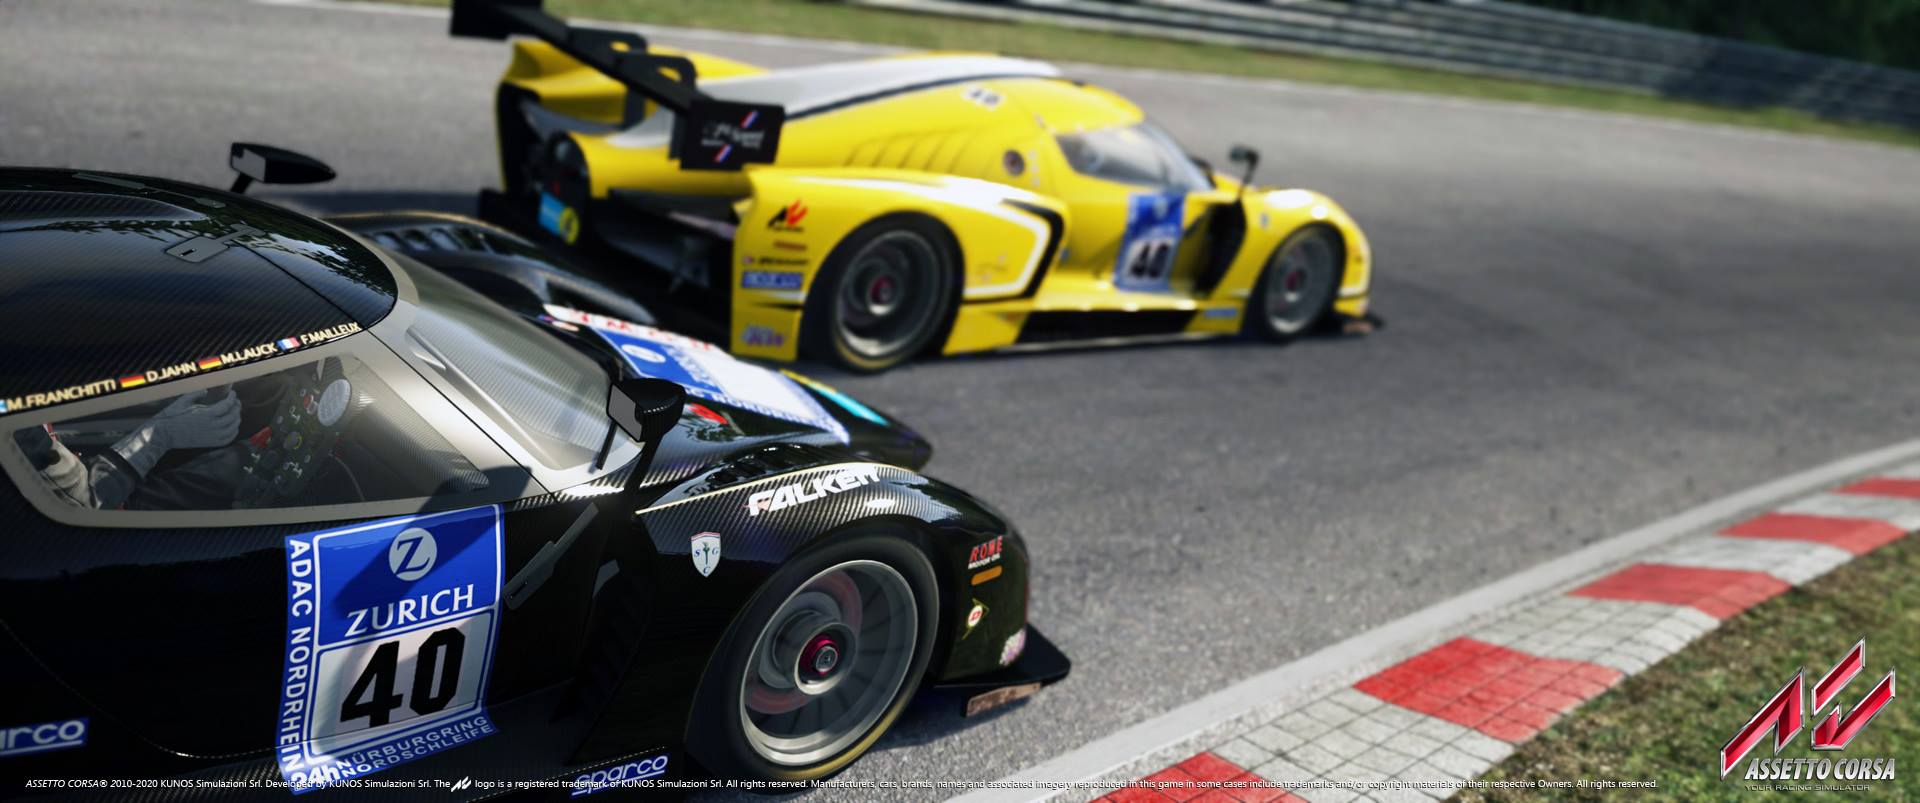 News The Teasing For The Dreampack 2 Begins Assetto Corsa Mods